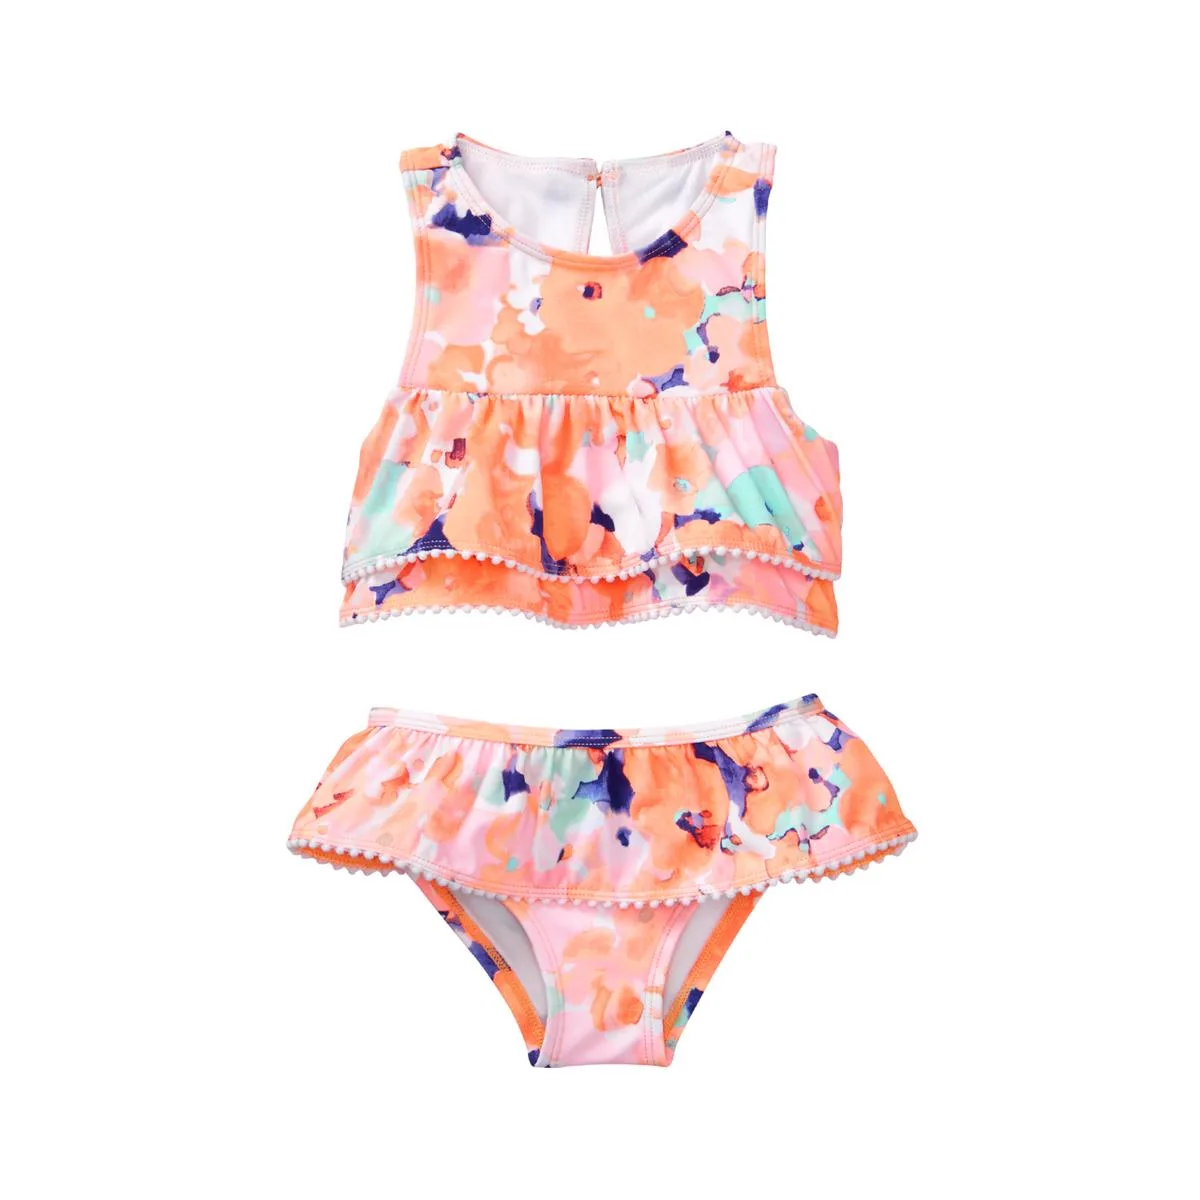 peach Most Adorable Toddler Girl Swimsuits These are the most adorable toddler girl swimsuits I have seen this season. If you're planning on taking your toddler to the beach then check out these tips for a happy vacation.  There are super cute girl bathing suits to fit any budget.  This post does contain affiliate links, any purchase you make doesn't cost you anything and helps support this site.